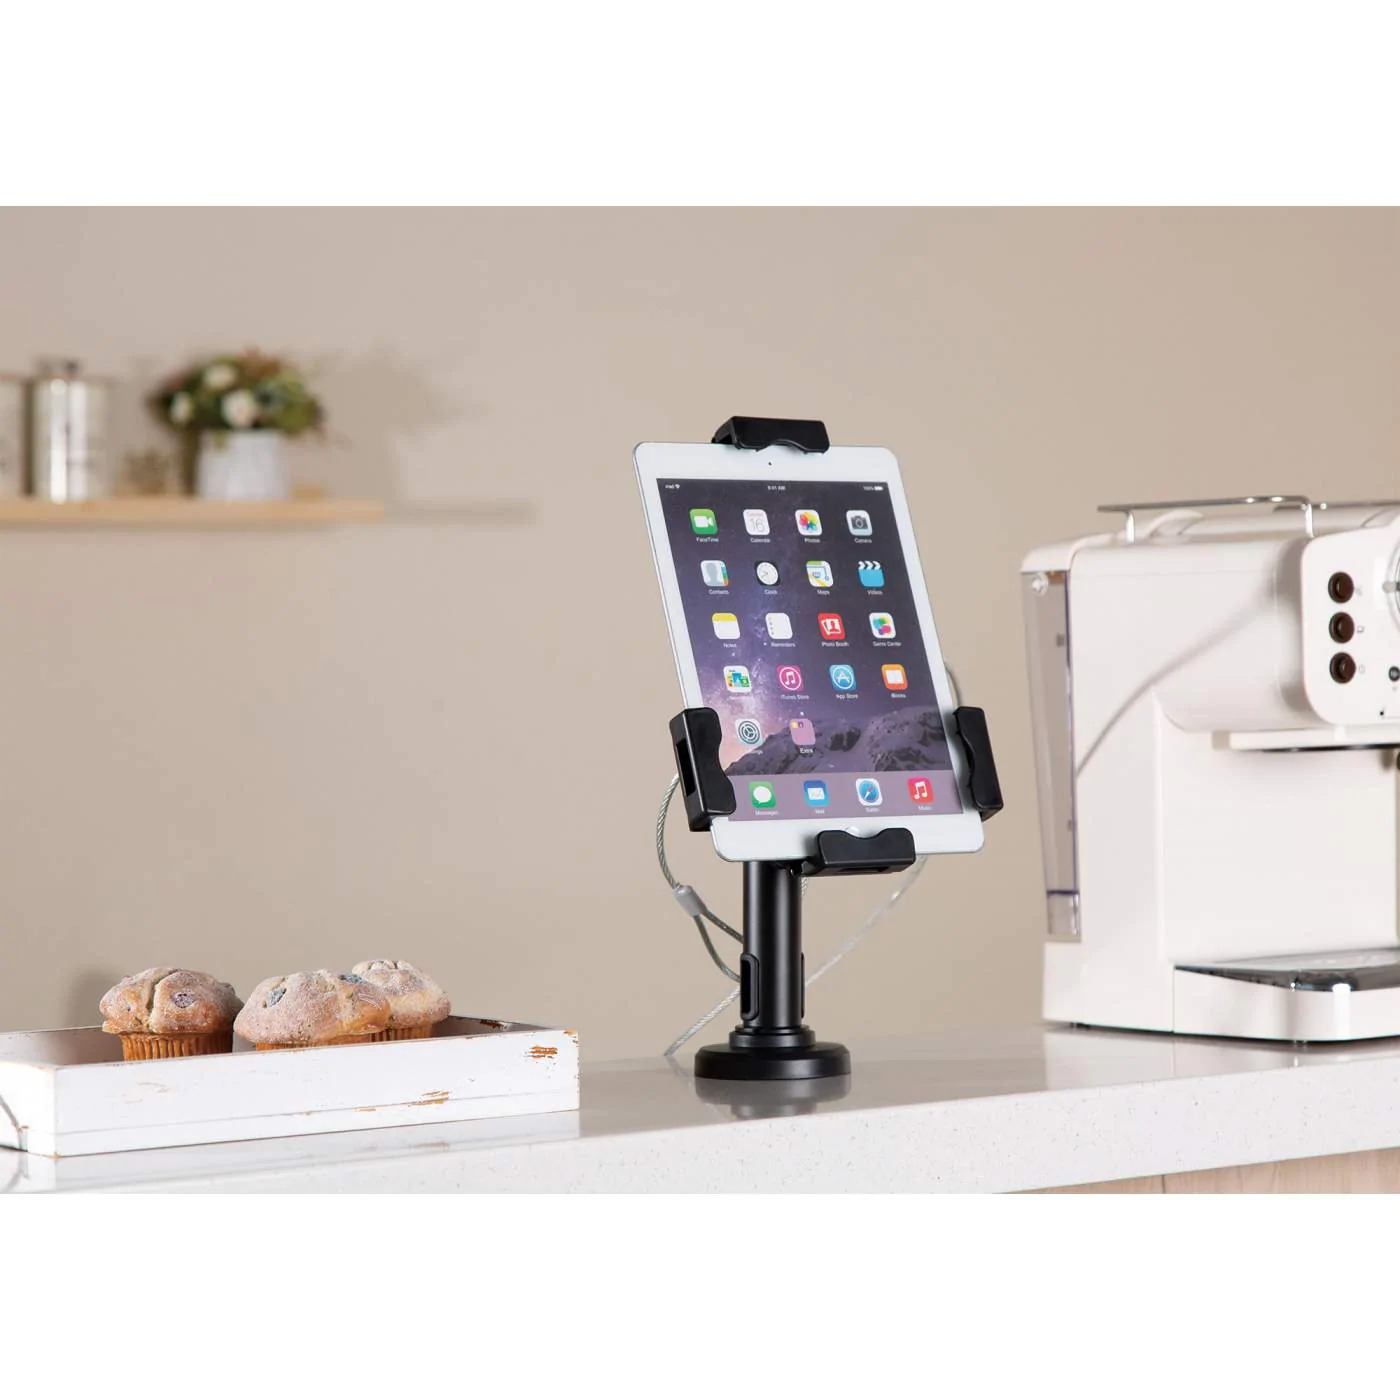 kable-desk-stand-and-wall-mount-holder-for-tablet-and-ipad-462112-14